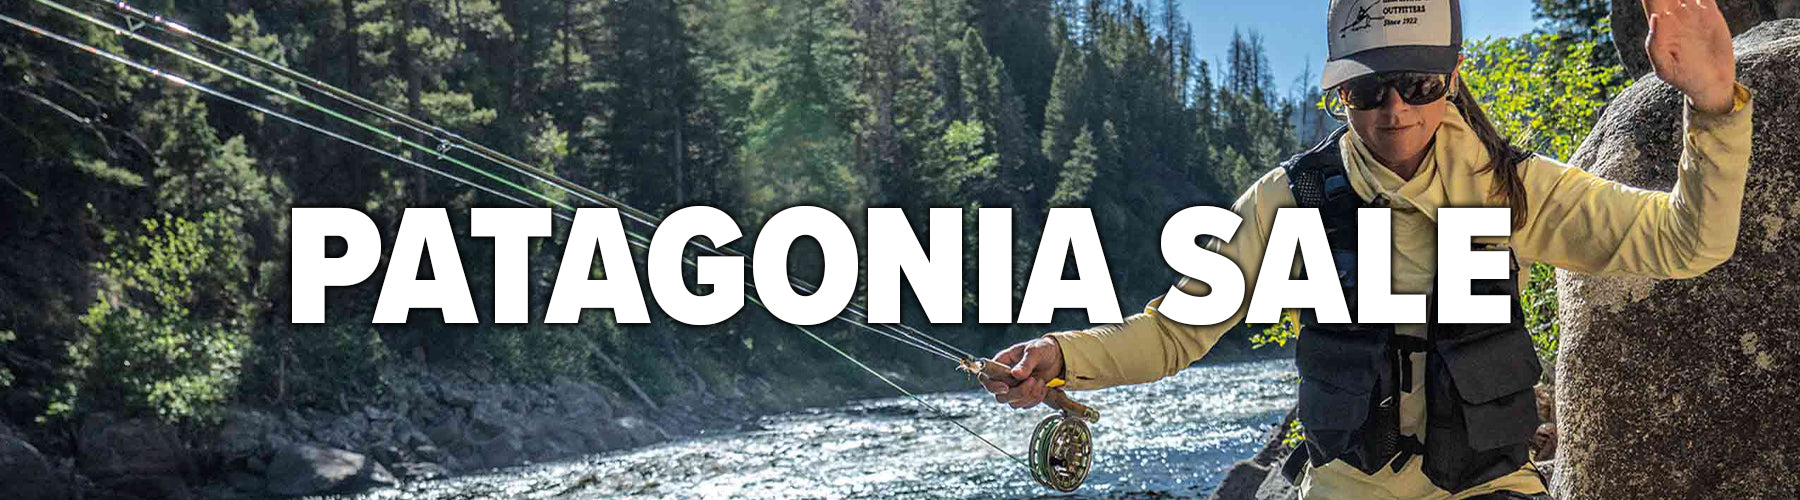 Patagonia-Fly-Fishing-Sale